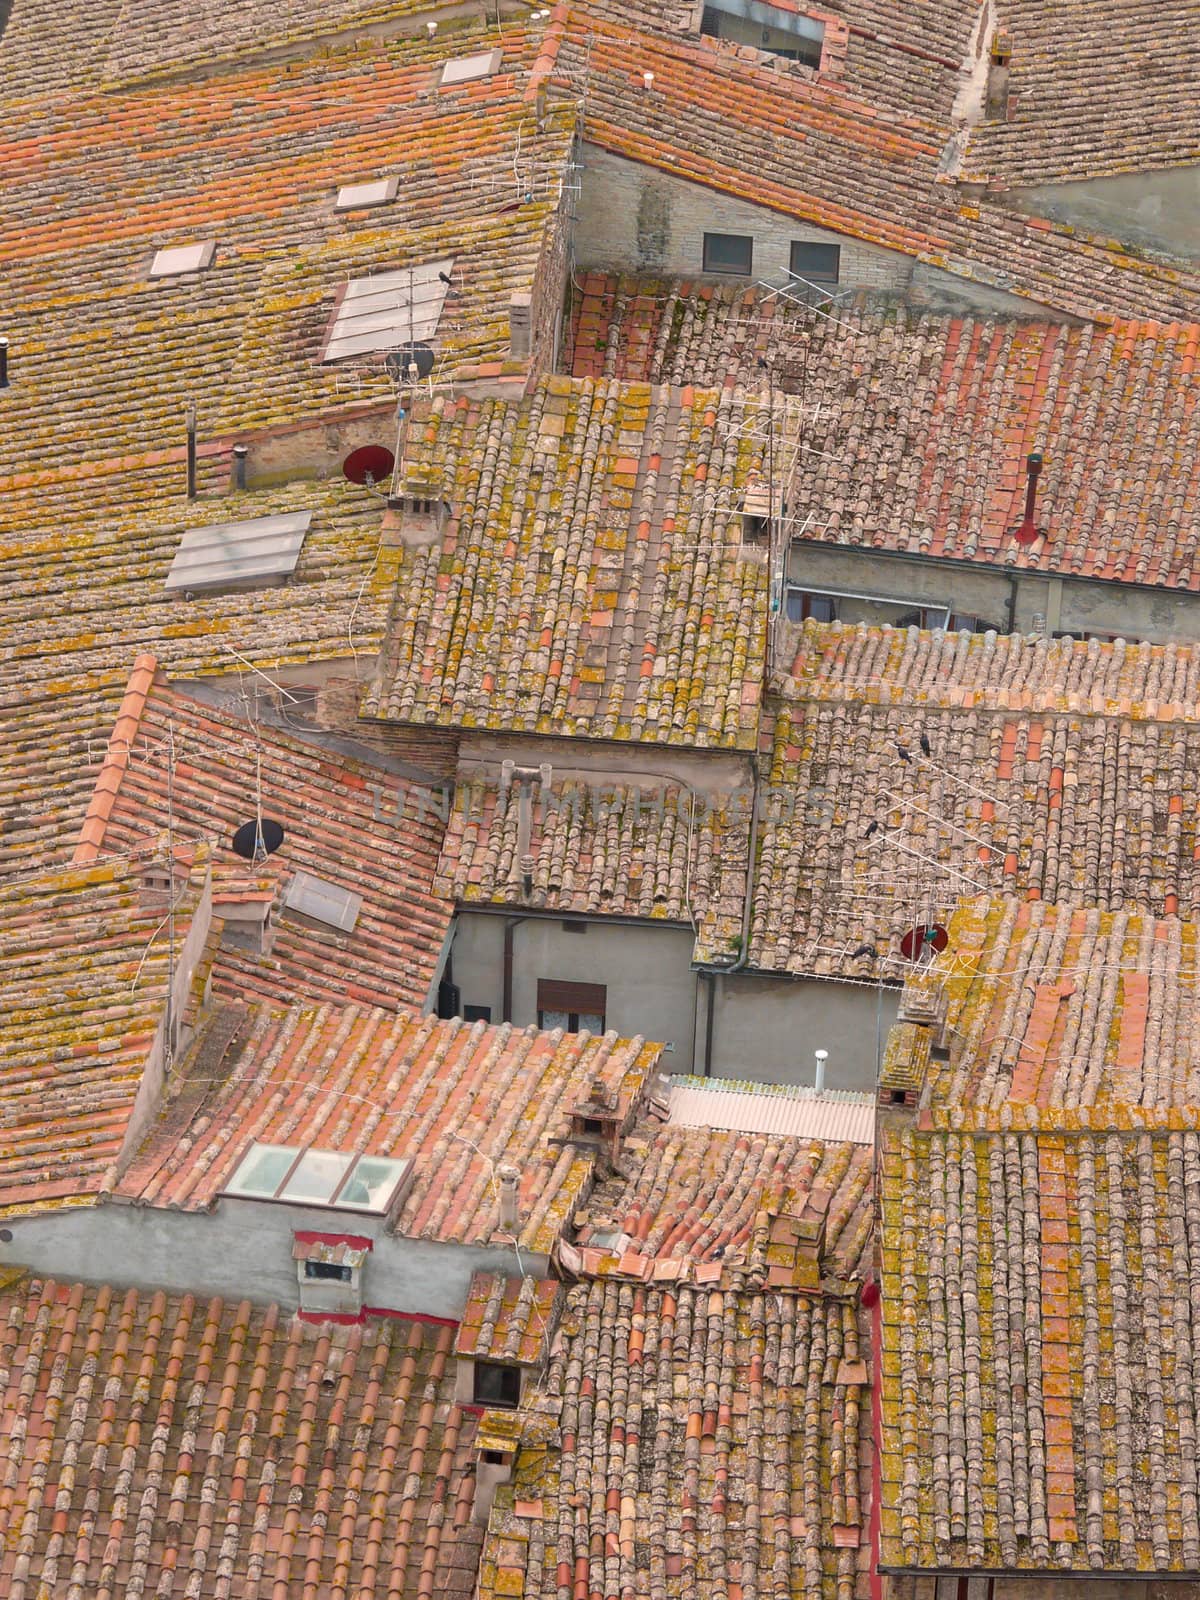 Roofs in San Gimignano in Italy seen from above.